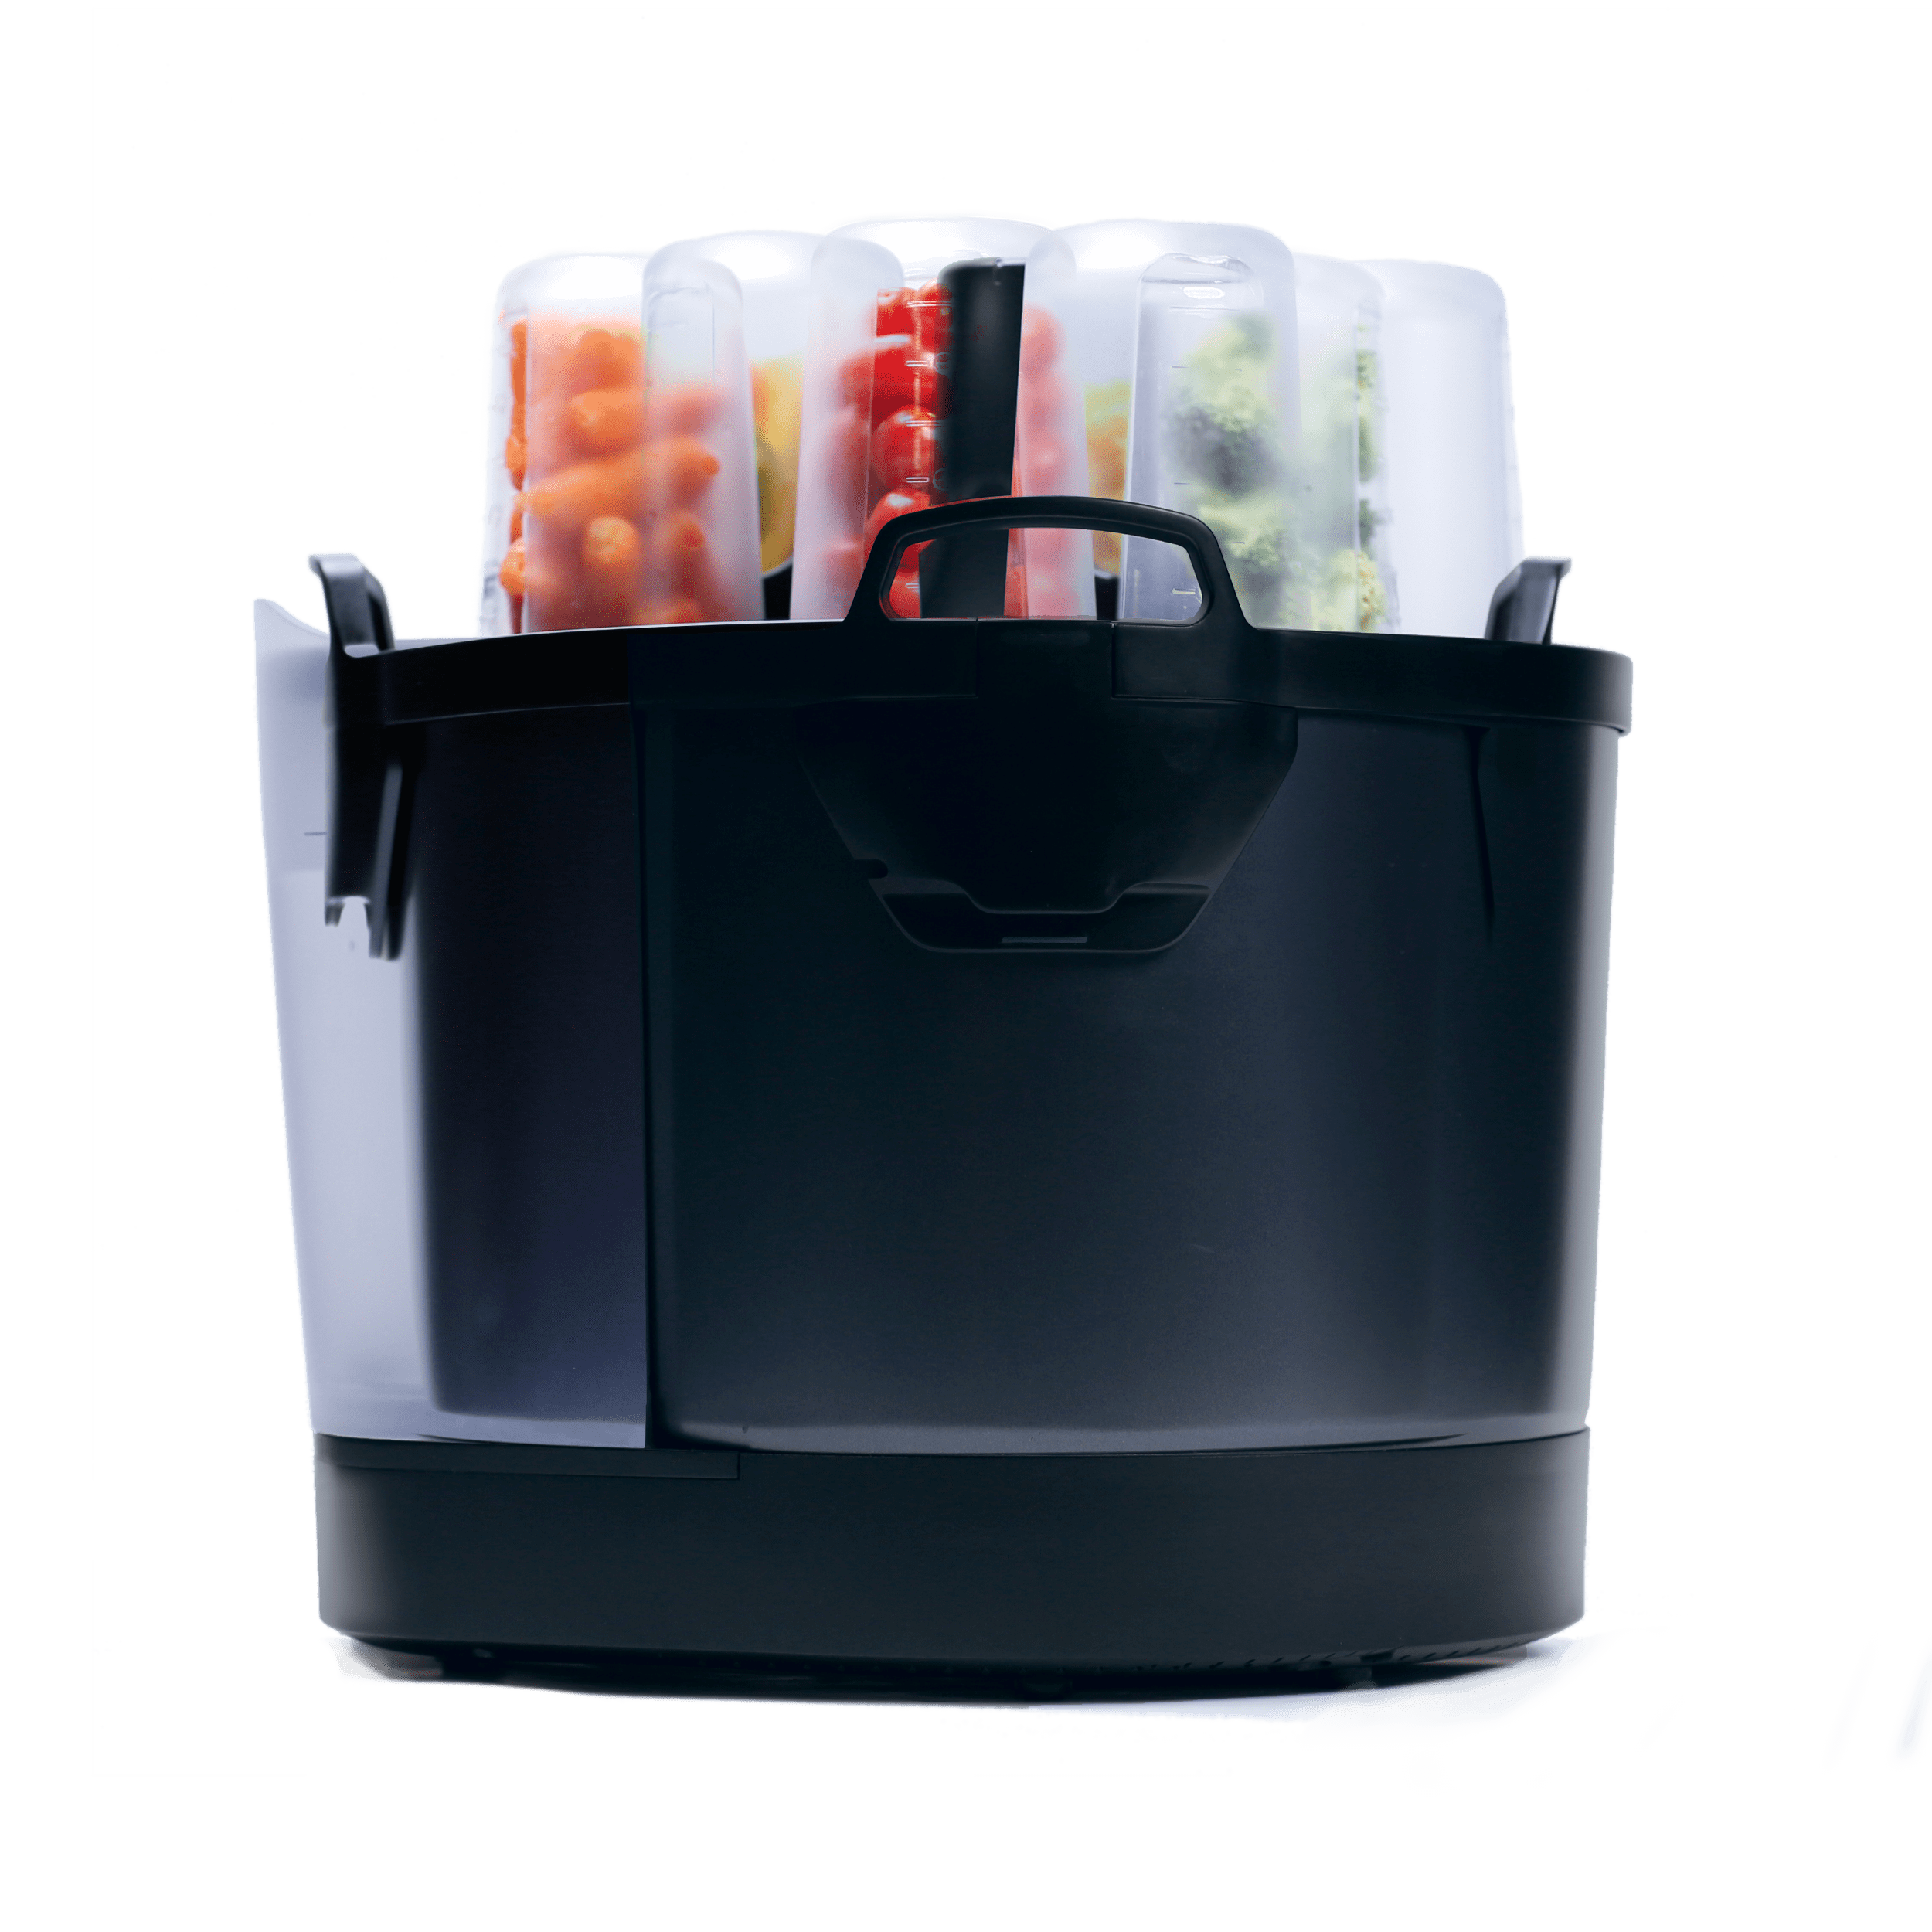 Side profile view of the black Oliver unit (smart Kitchen robot). The side profile shows Oliver's water tank & jars loaded on top of the unit full of ingredients. Oliver is a smart kitchen appliance.